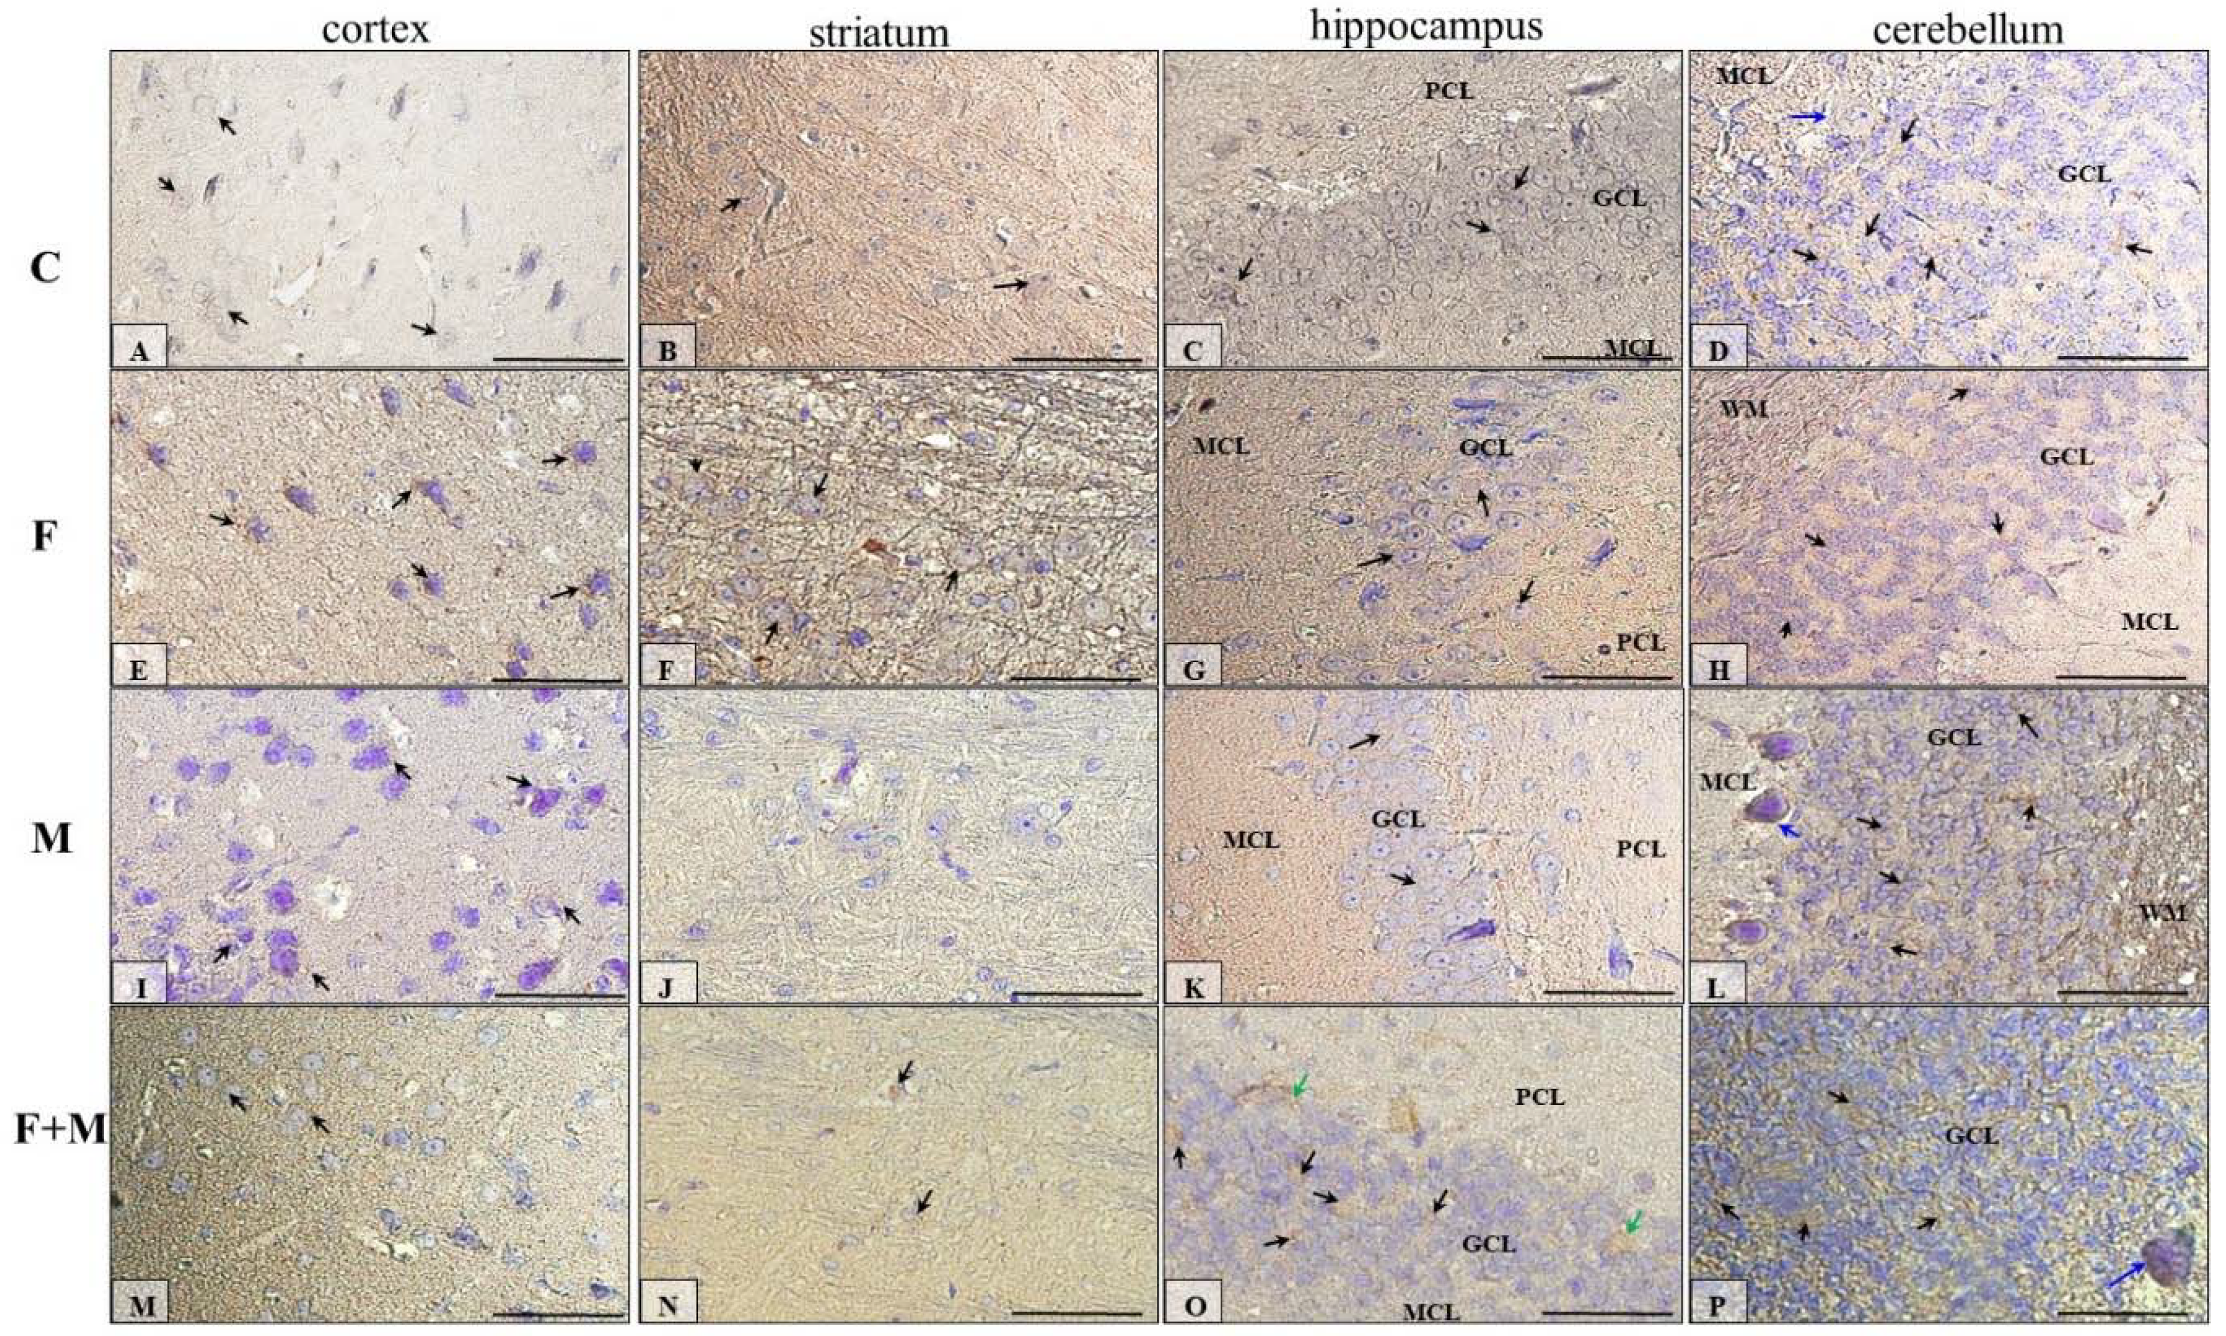 Ijms Free Full Text Fluoride Affects Dopamine Metabolism And Causes Changes In The Expression Of Dopamine Receptors D1r And D2r In Chosen Brain Structures Of Morphine Dependent Rats Html